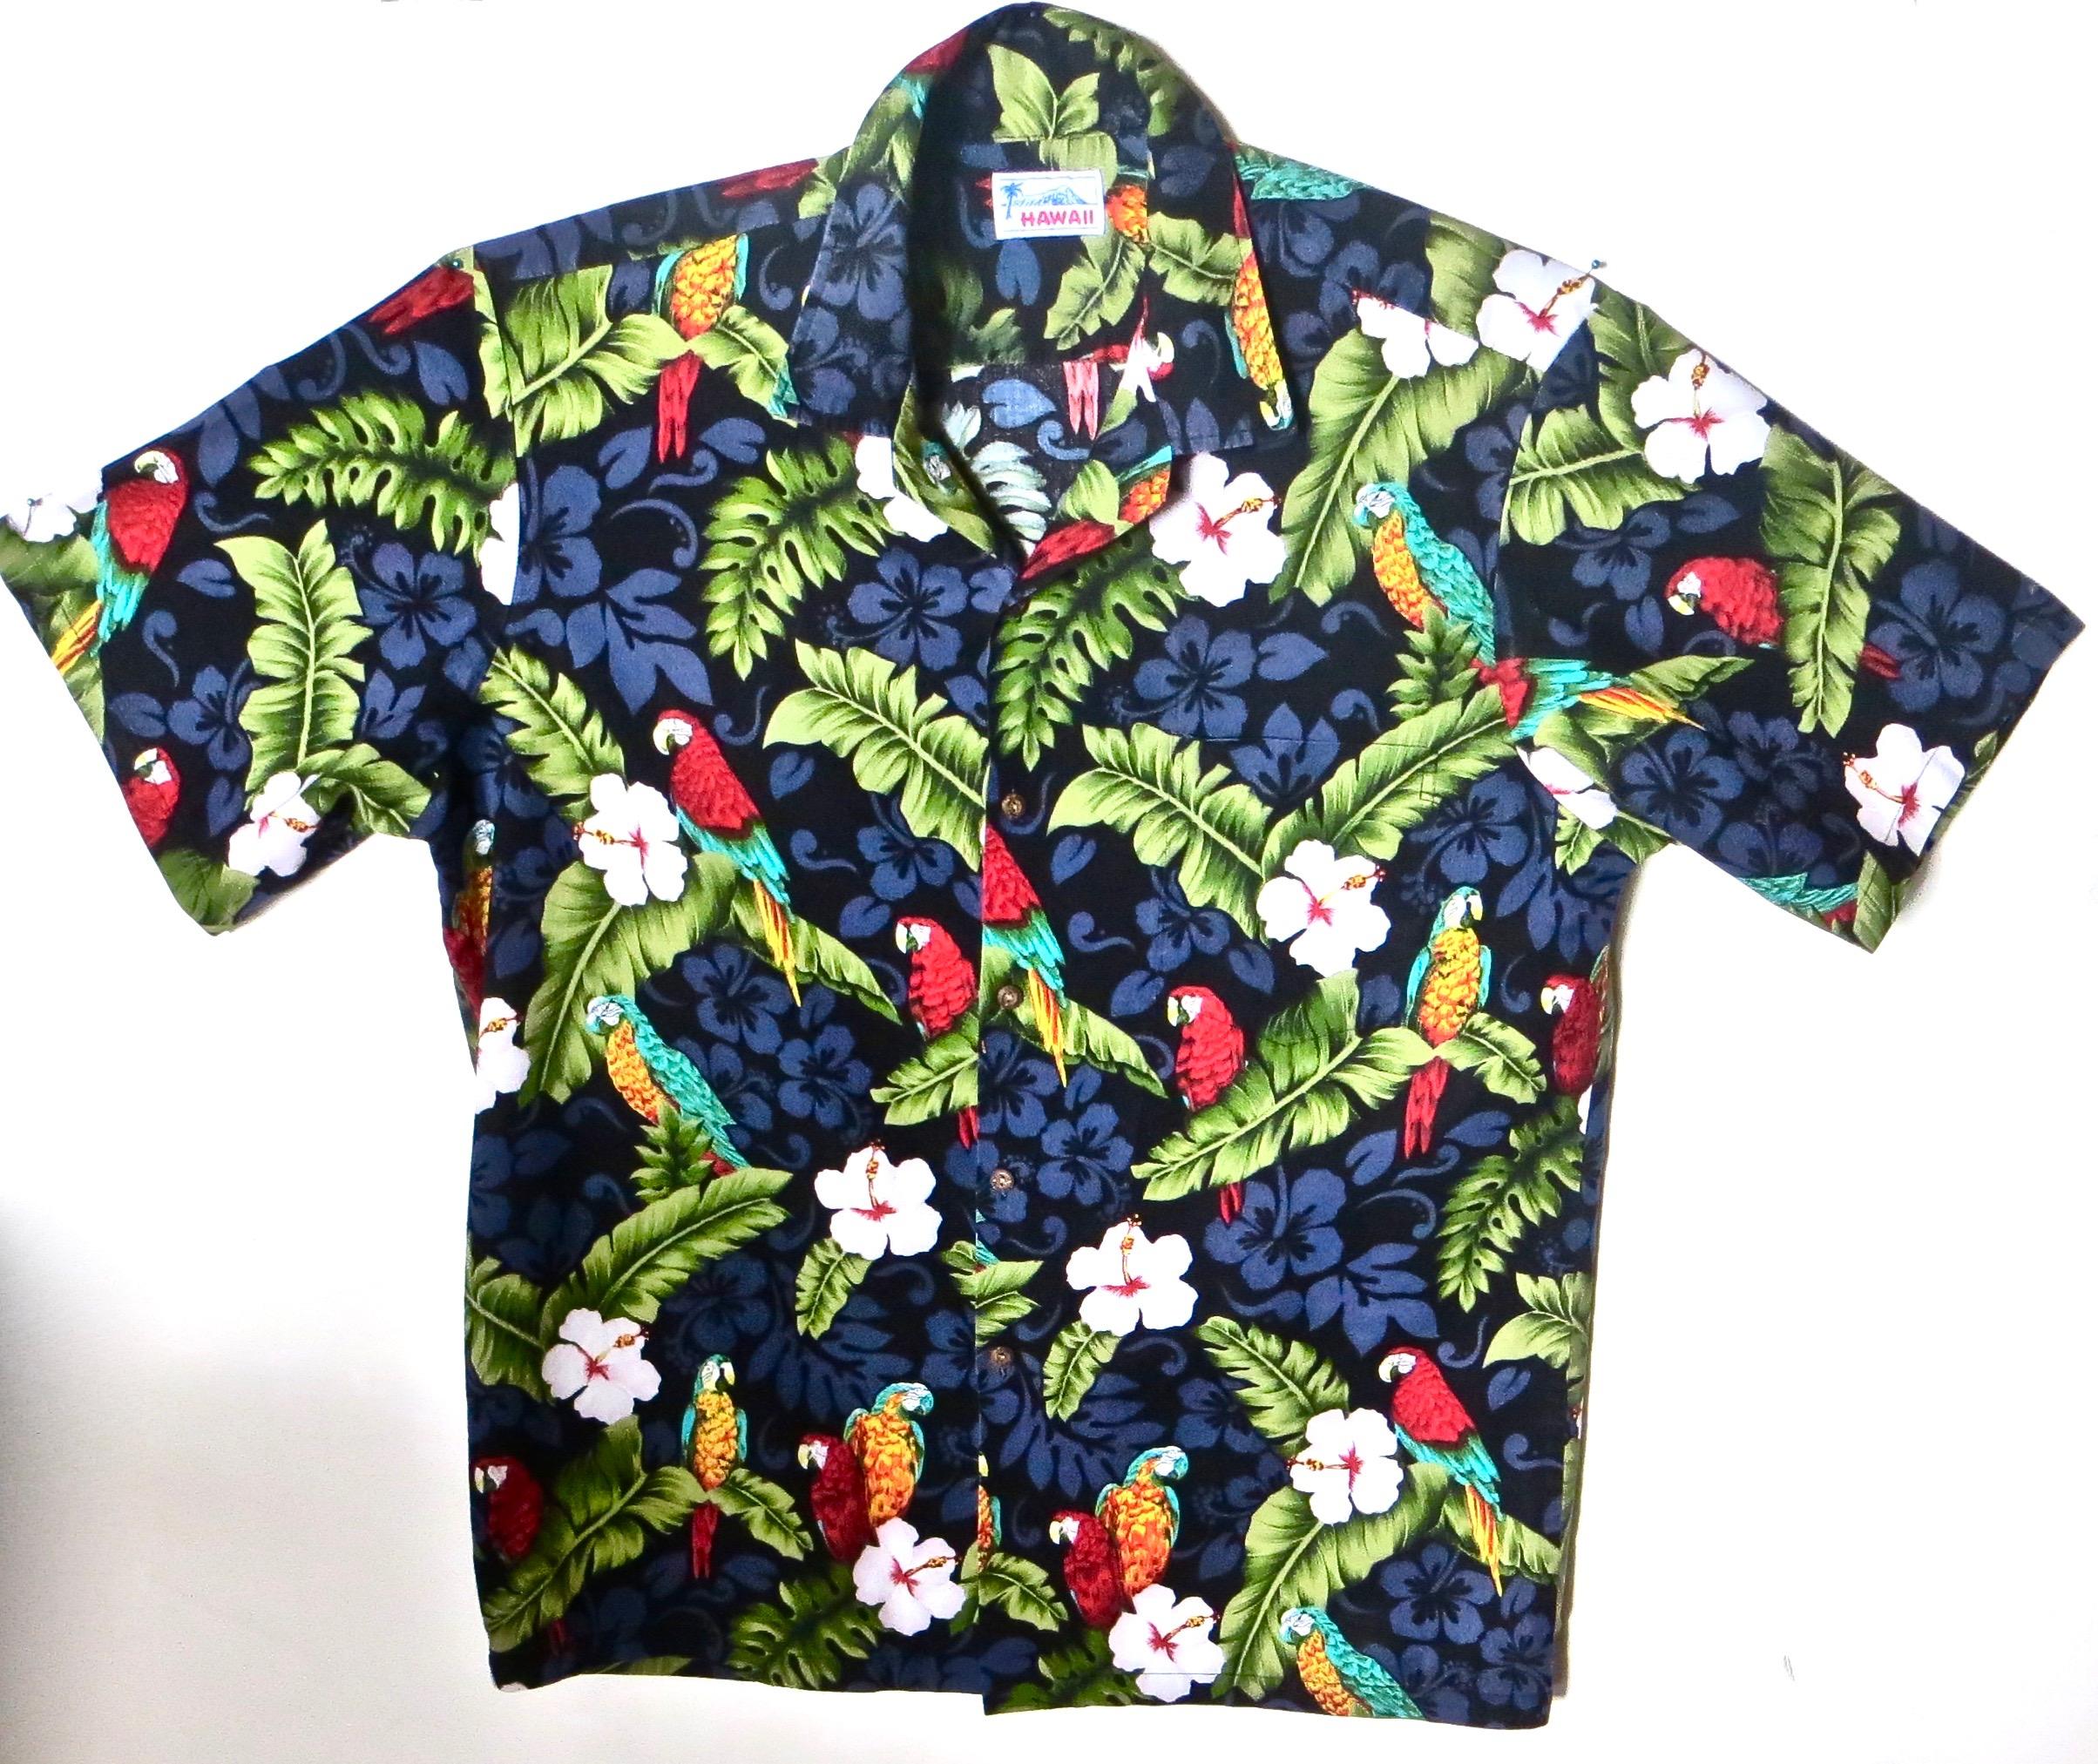 Vintage Hawaiian Shirt, Parrot and Floral Design, Men's X-Large, Circa 1970's In Good Condition For Sale In Incline Village, NV